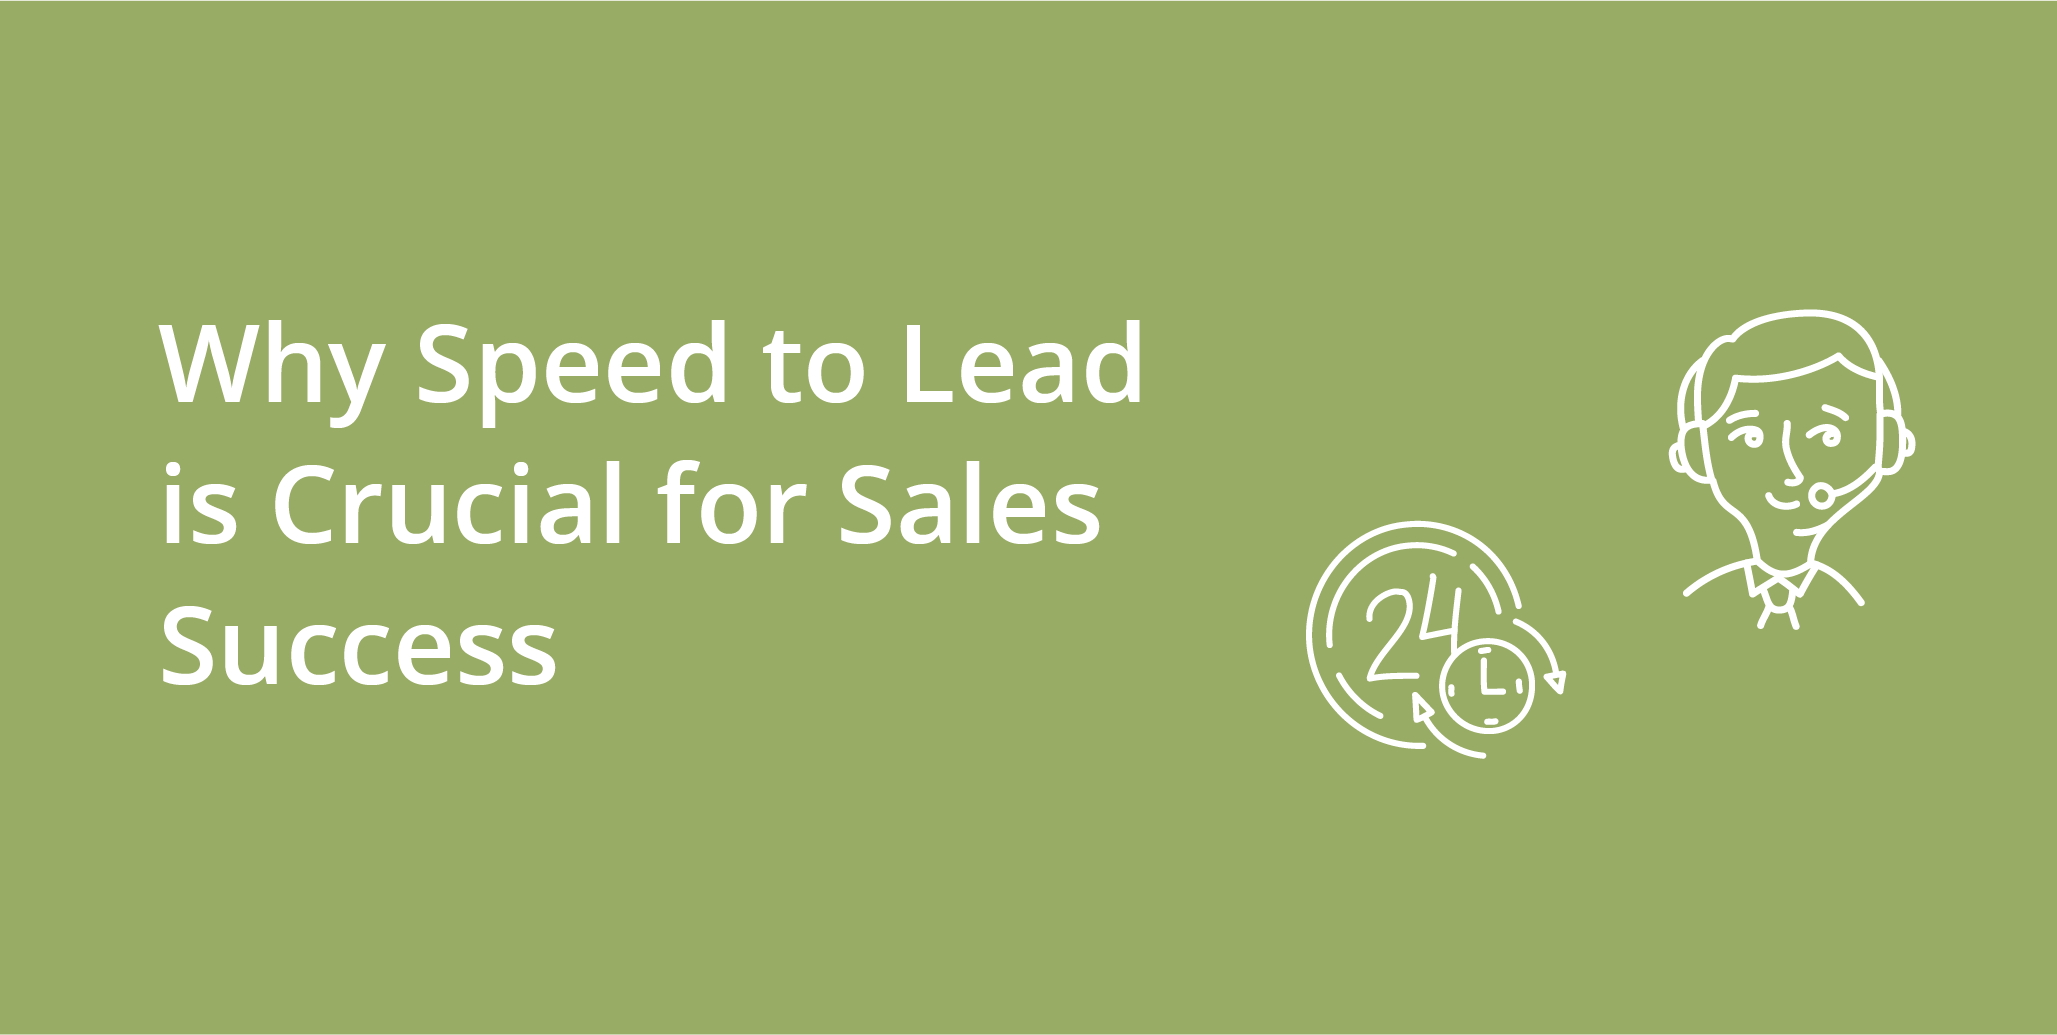 Why Speed to Lead is Crucial for Sales Success